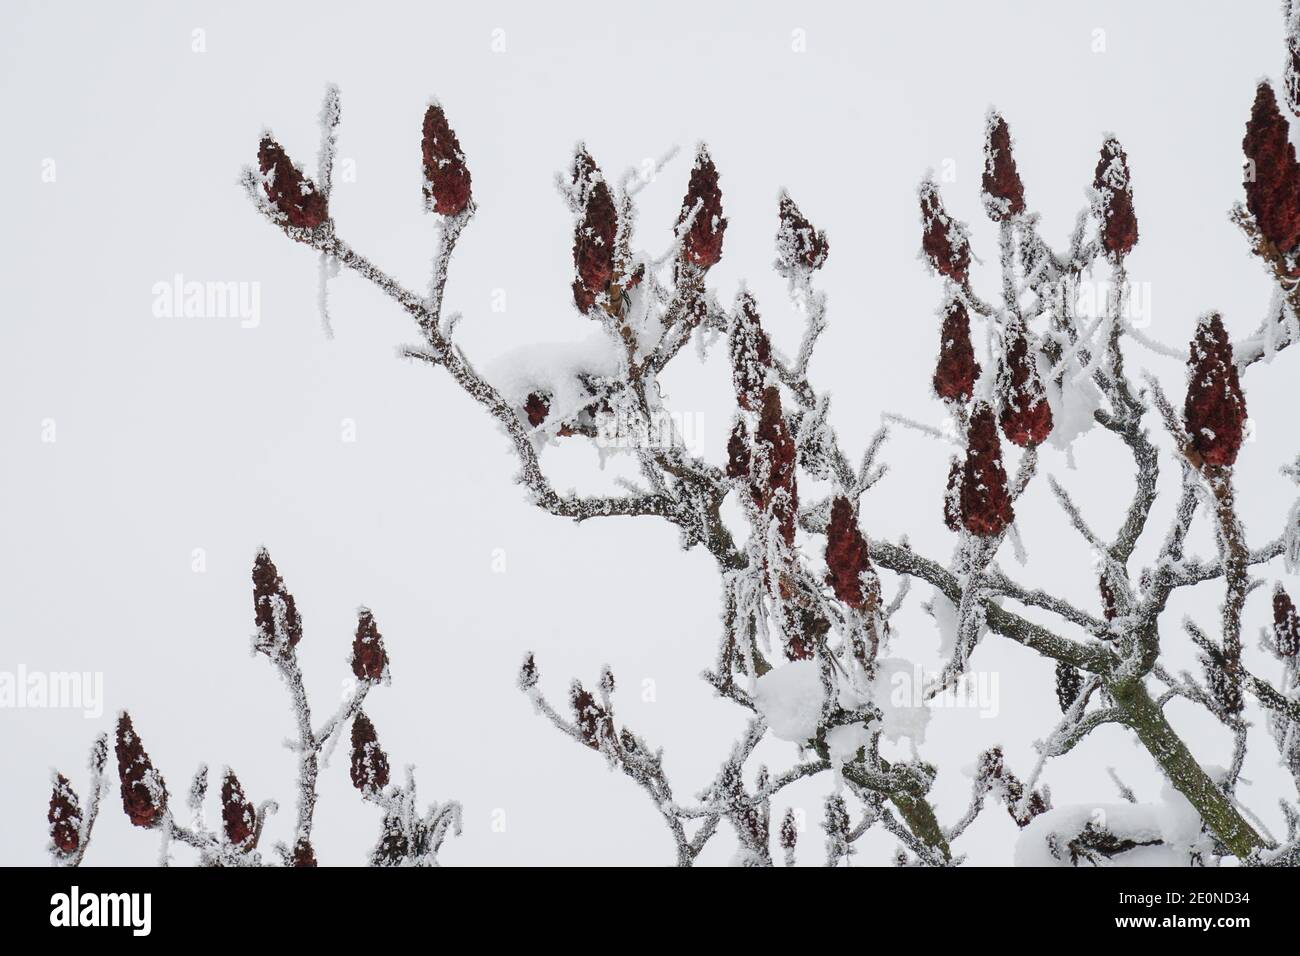 Mortara -12/29/2020: tree branches with buds covered with snow Stock Photo